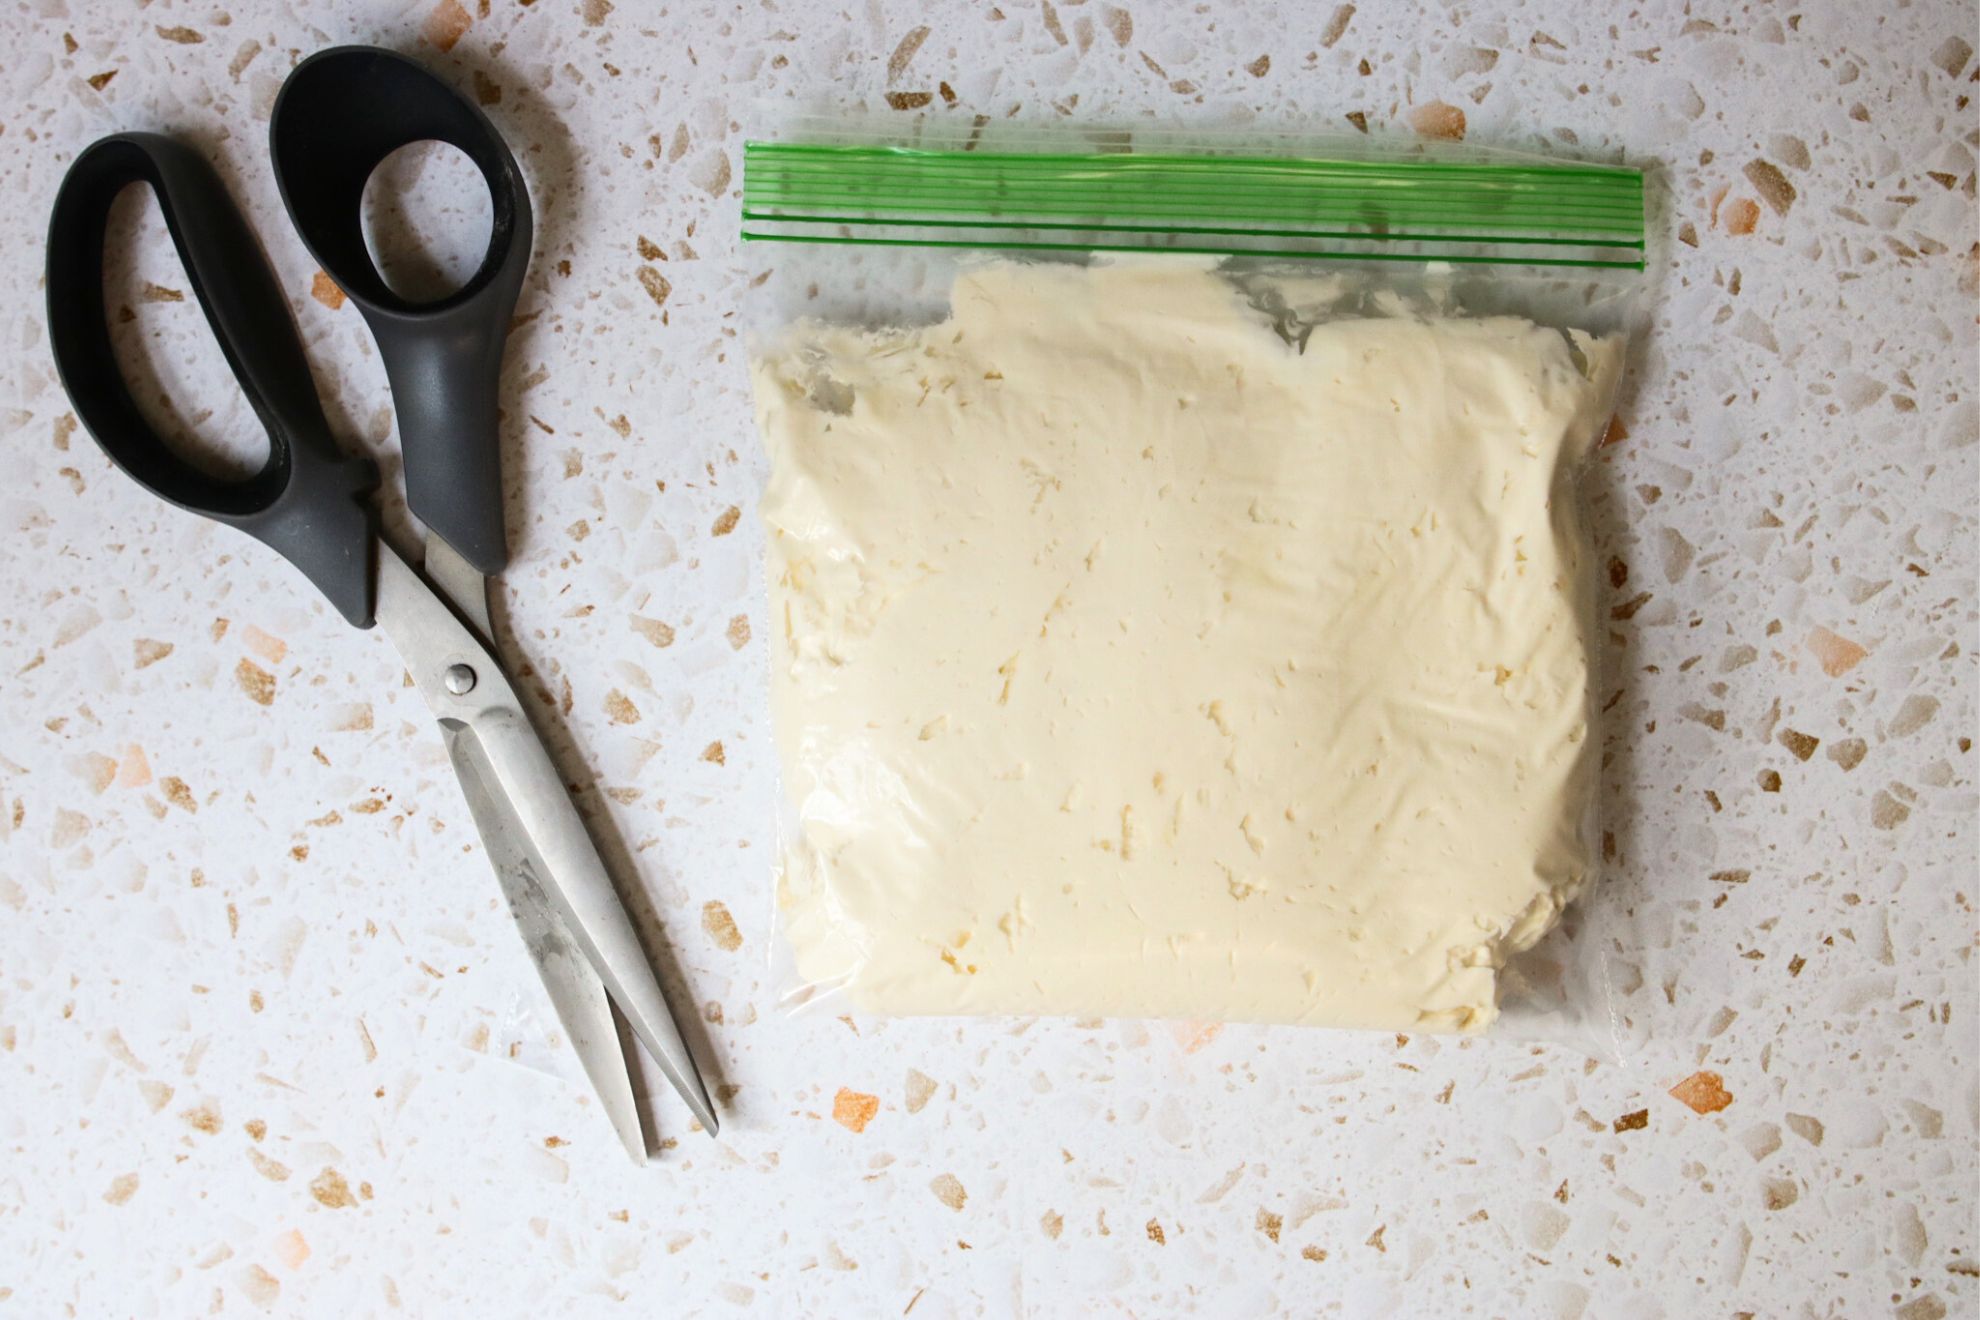 This is an overhead horizontal image looking down on a plastic zip-top bag filled with vanilla frosting on a light terrazzo surface. Scissors are to the left of the baggie.